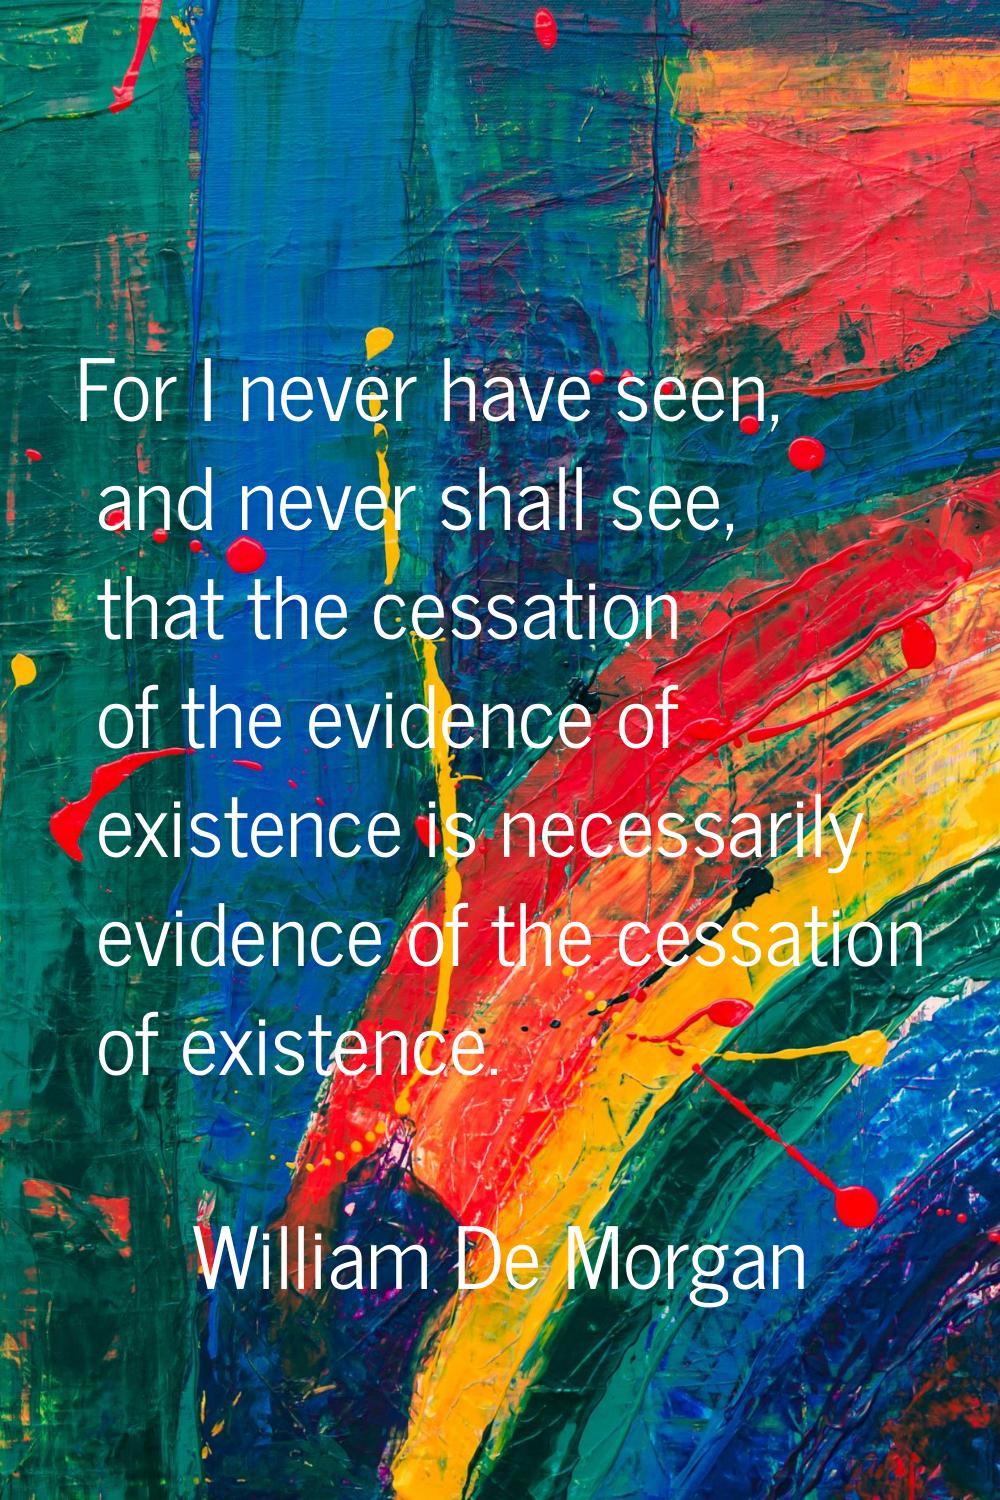 For I never have seen, and never shall see, that the cessation of the evidence of existence is nece